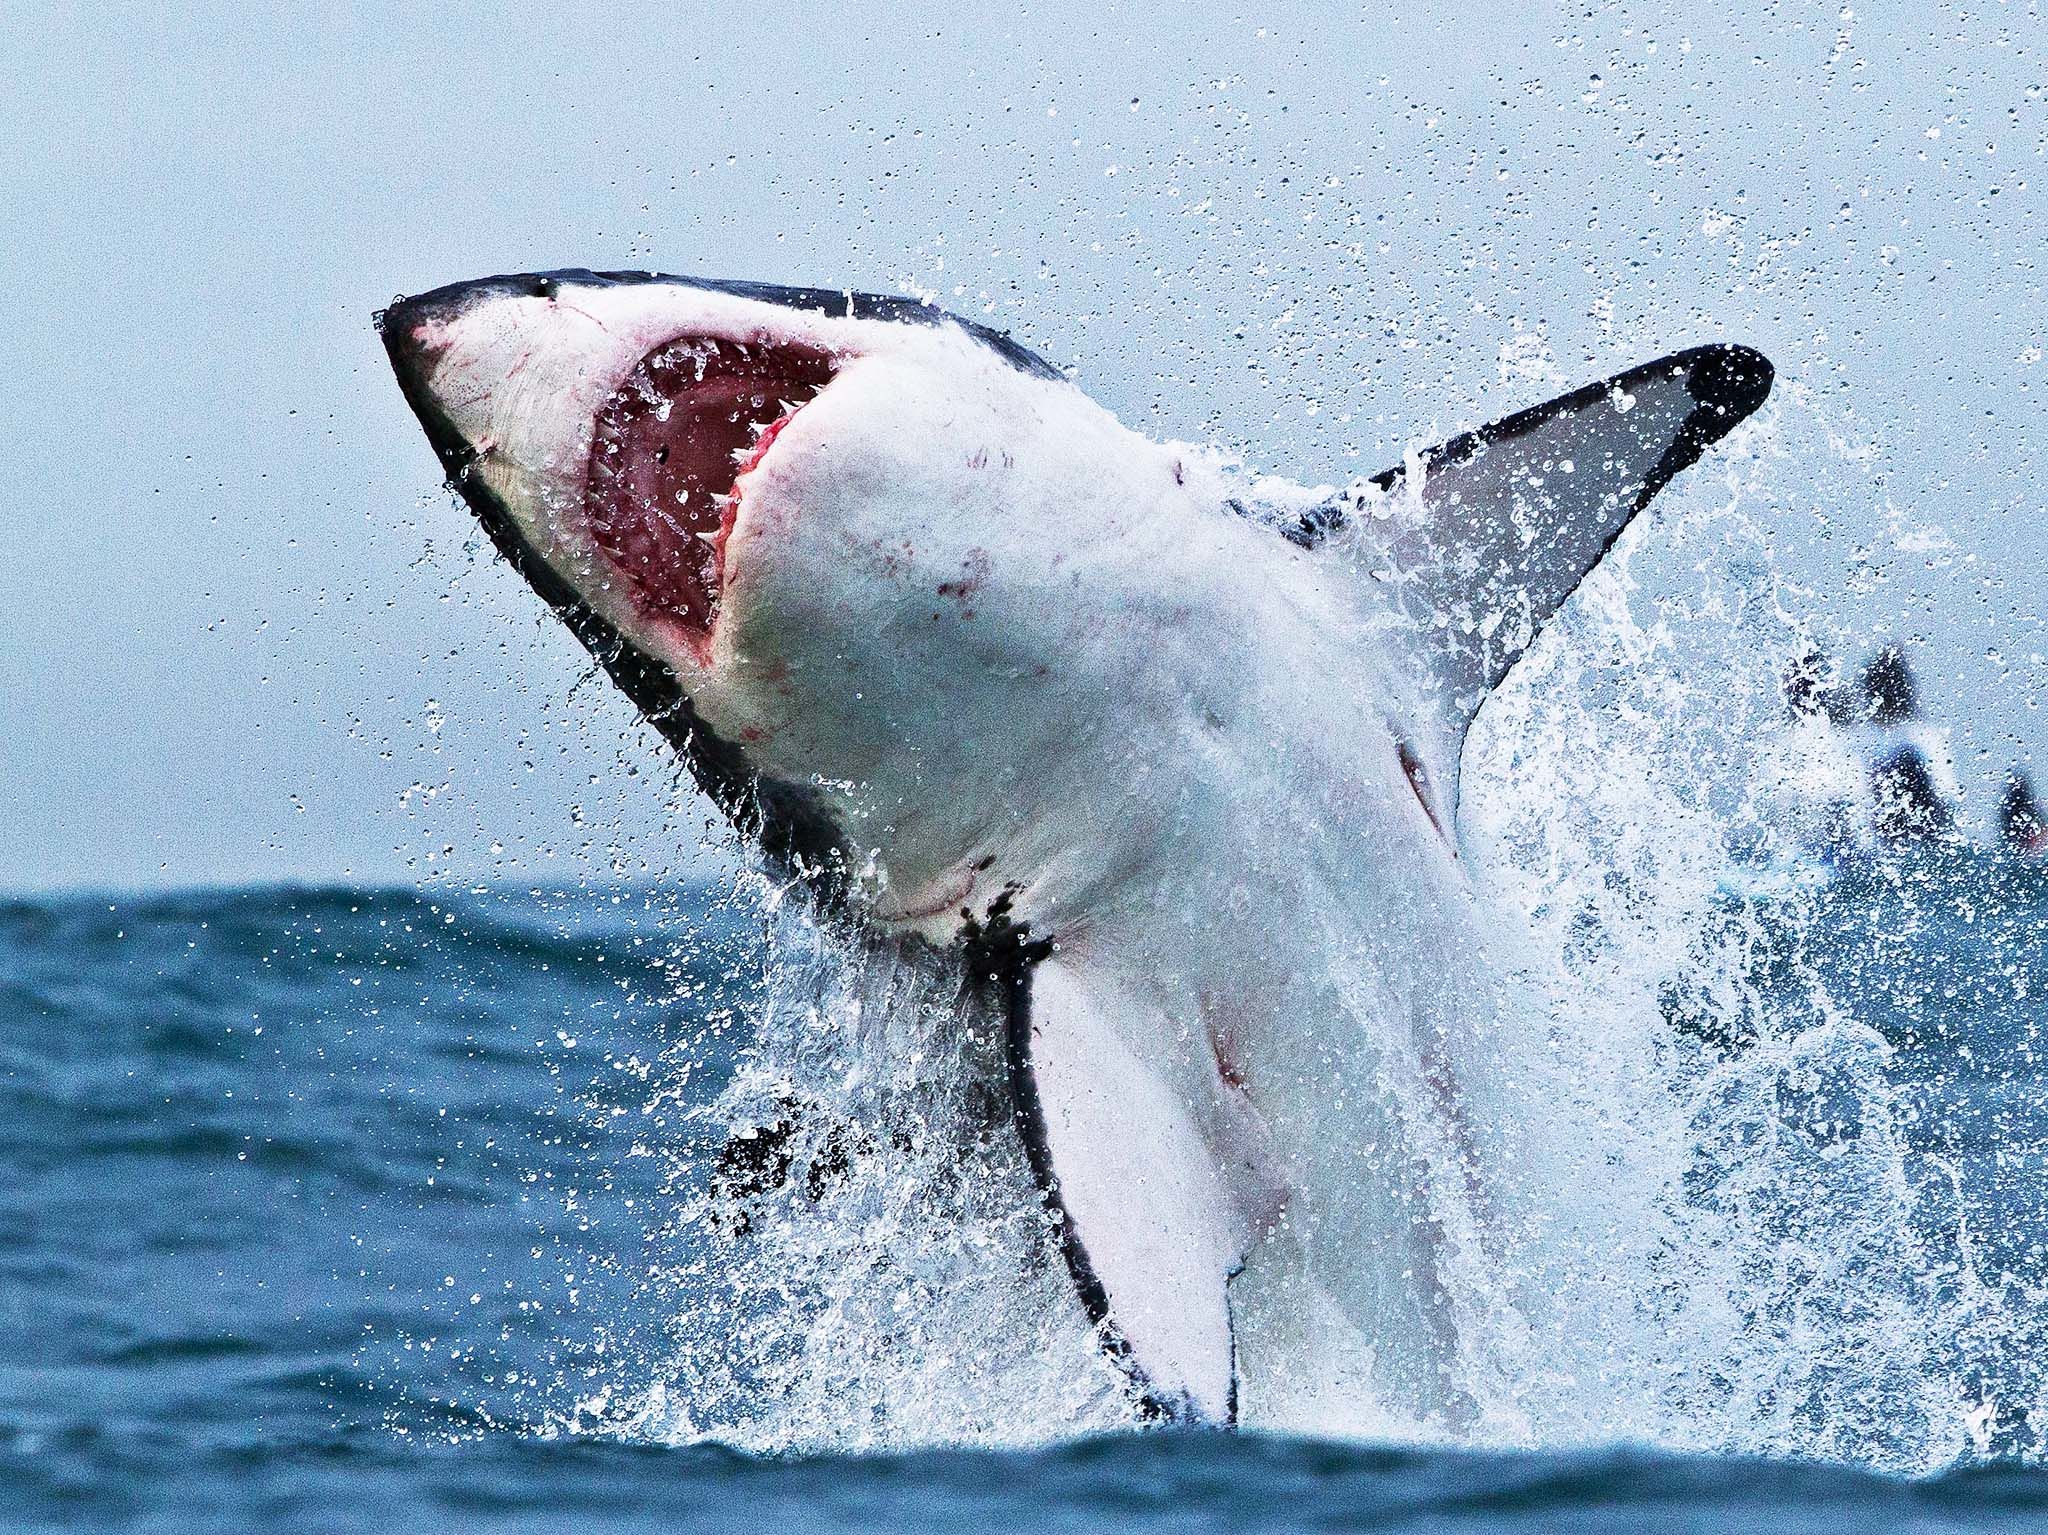 Reaching speeds of over 20 miles an hour white shark launch 10 feet into the air. It's the... [Photo of the day - July 2019]